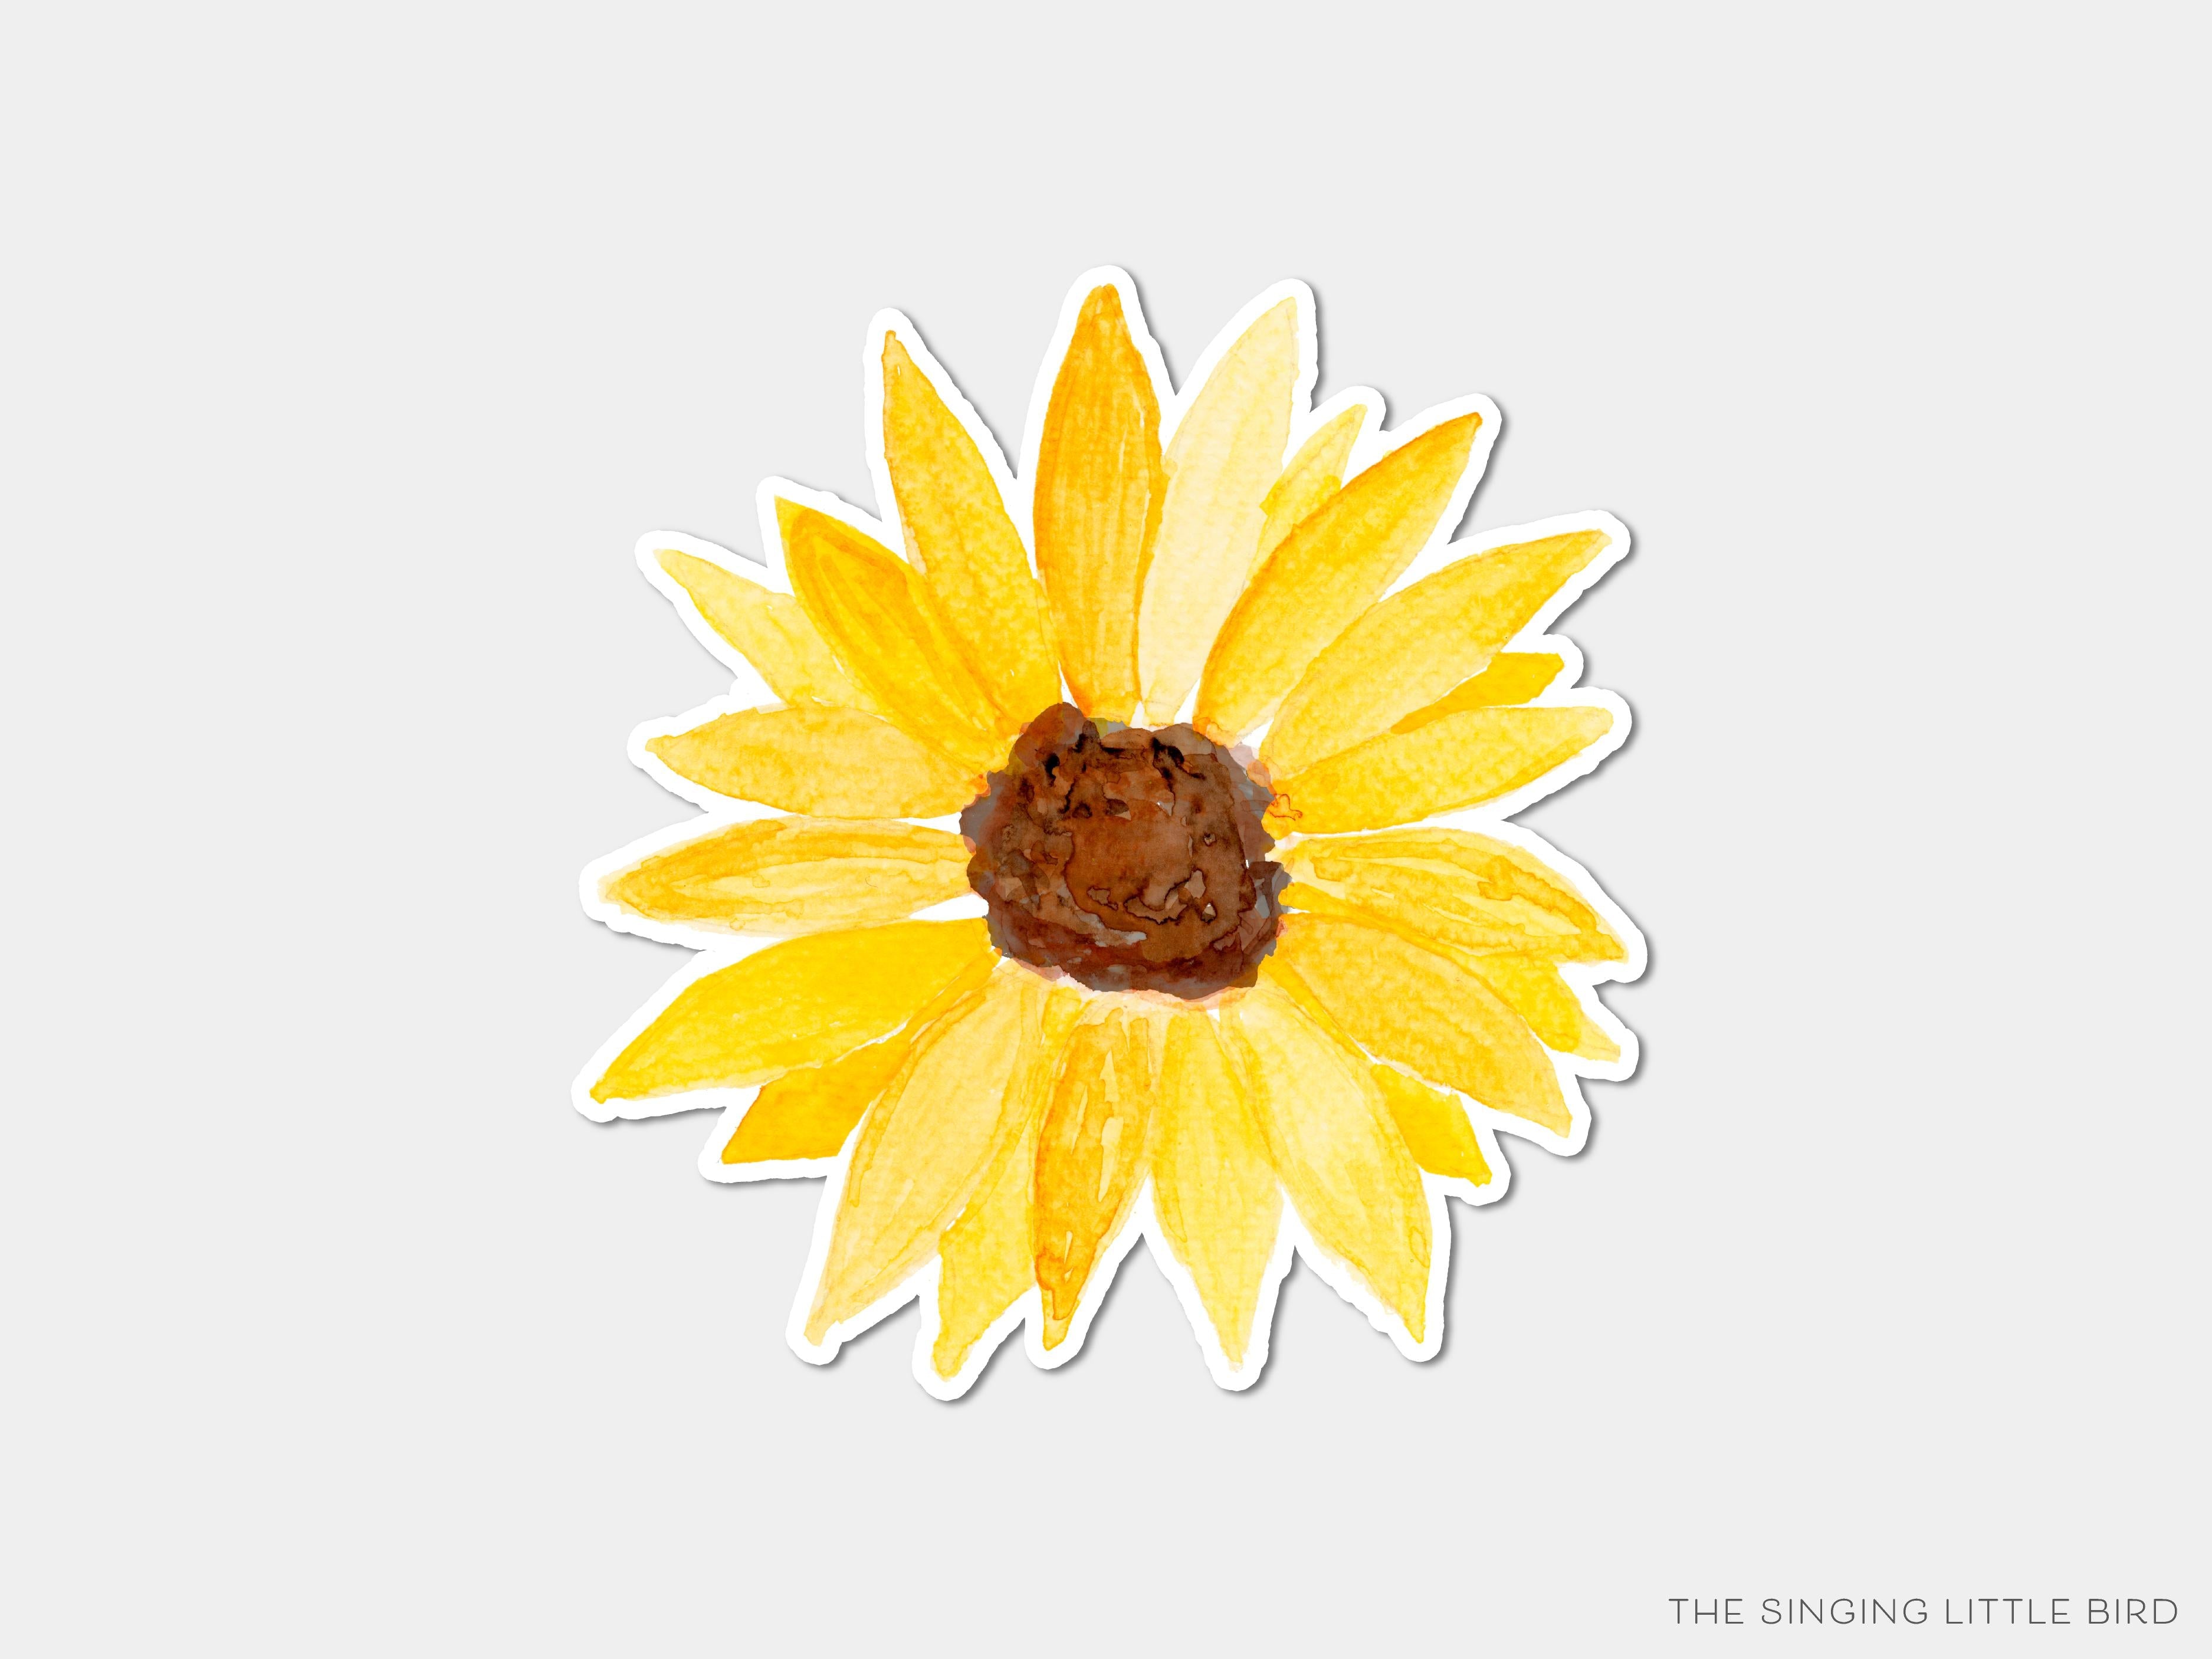 Sunflower Vinyl Sticker-These weatherproof die cut stickers feature our hand-painted watercolor Sunflower, making great laptop or water bottle stickers or gifts for the flower lover in your life.-The Singing Little Bird